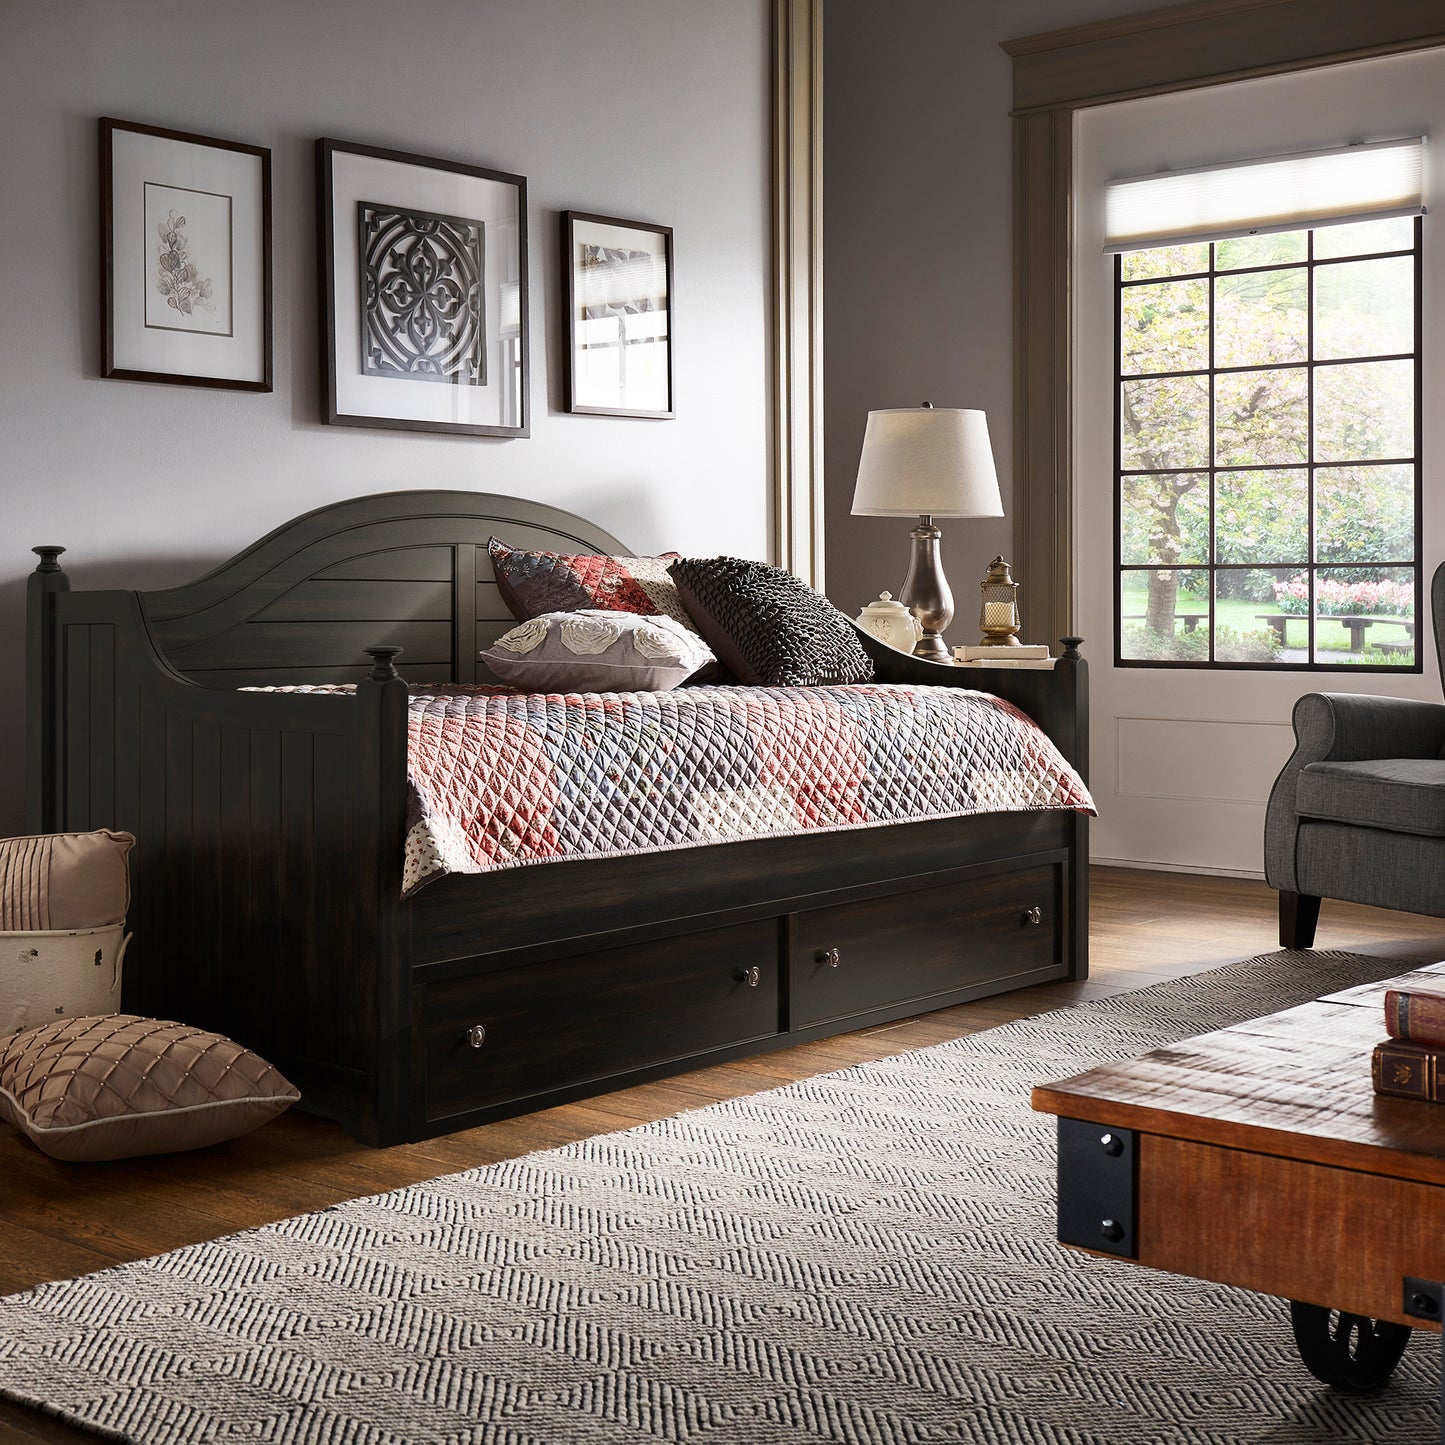 Traditional Paneled Wood Daybed - Antique Black, With Trundle